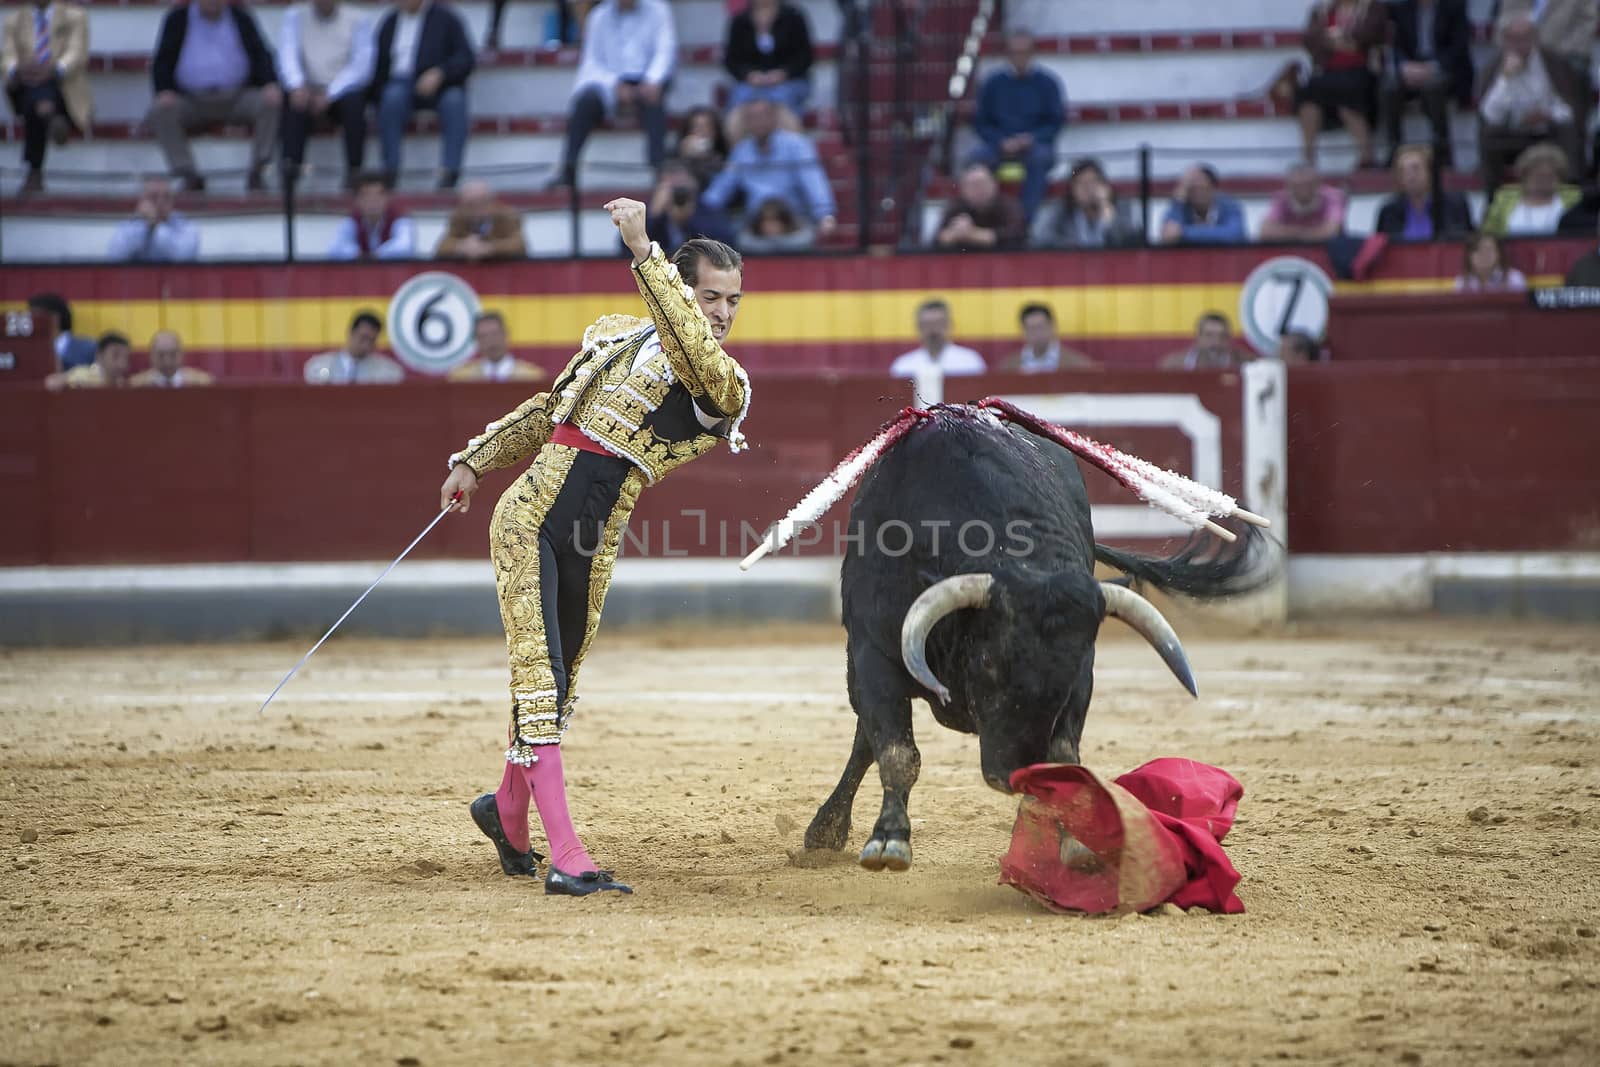  Jaen, SPAIN - 17 october 2008: Spanish bullfighter Cesar Jimenez, the bull takes the crutch from him to the soil and the toreador shows anger expression in Jaen bullring, Jaen province, Andalusia, Spain